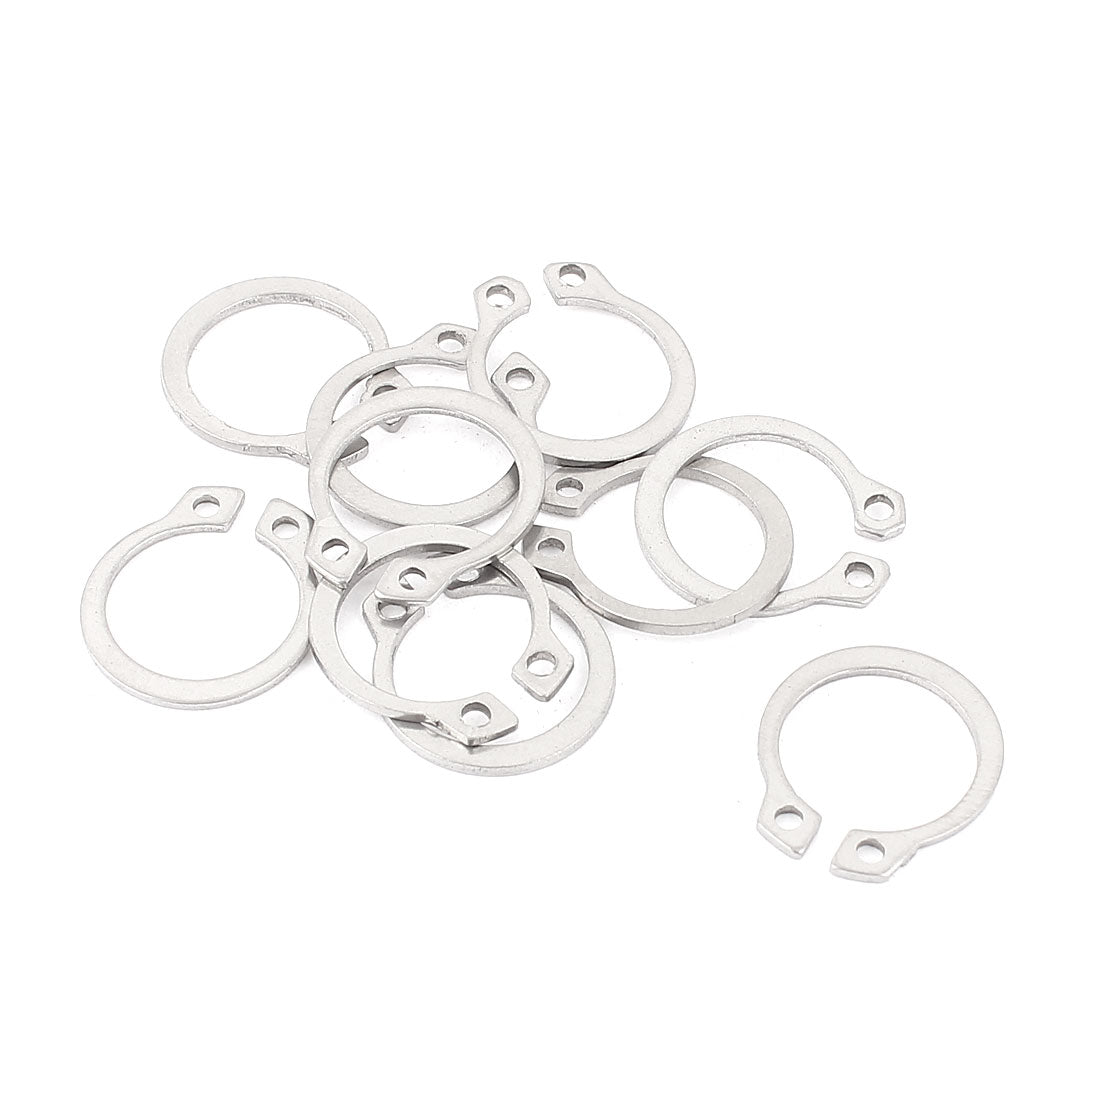 uxcell Uxcell 10pcs 304 Stainless Steel External Circlip Retaining Shaft Snap Rings 15 Models Inner Ring 13.7 mm